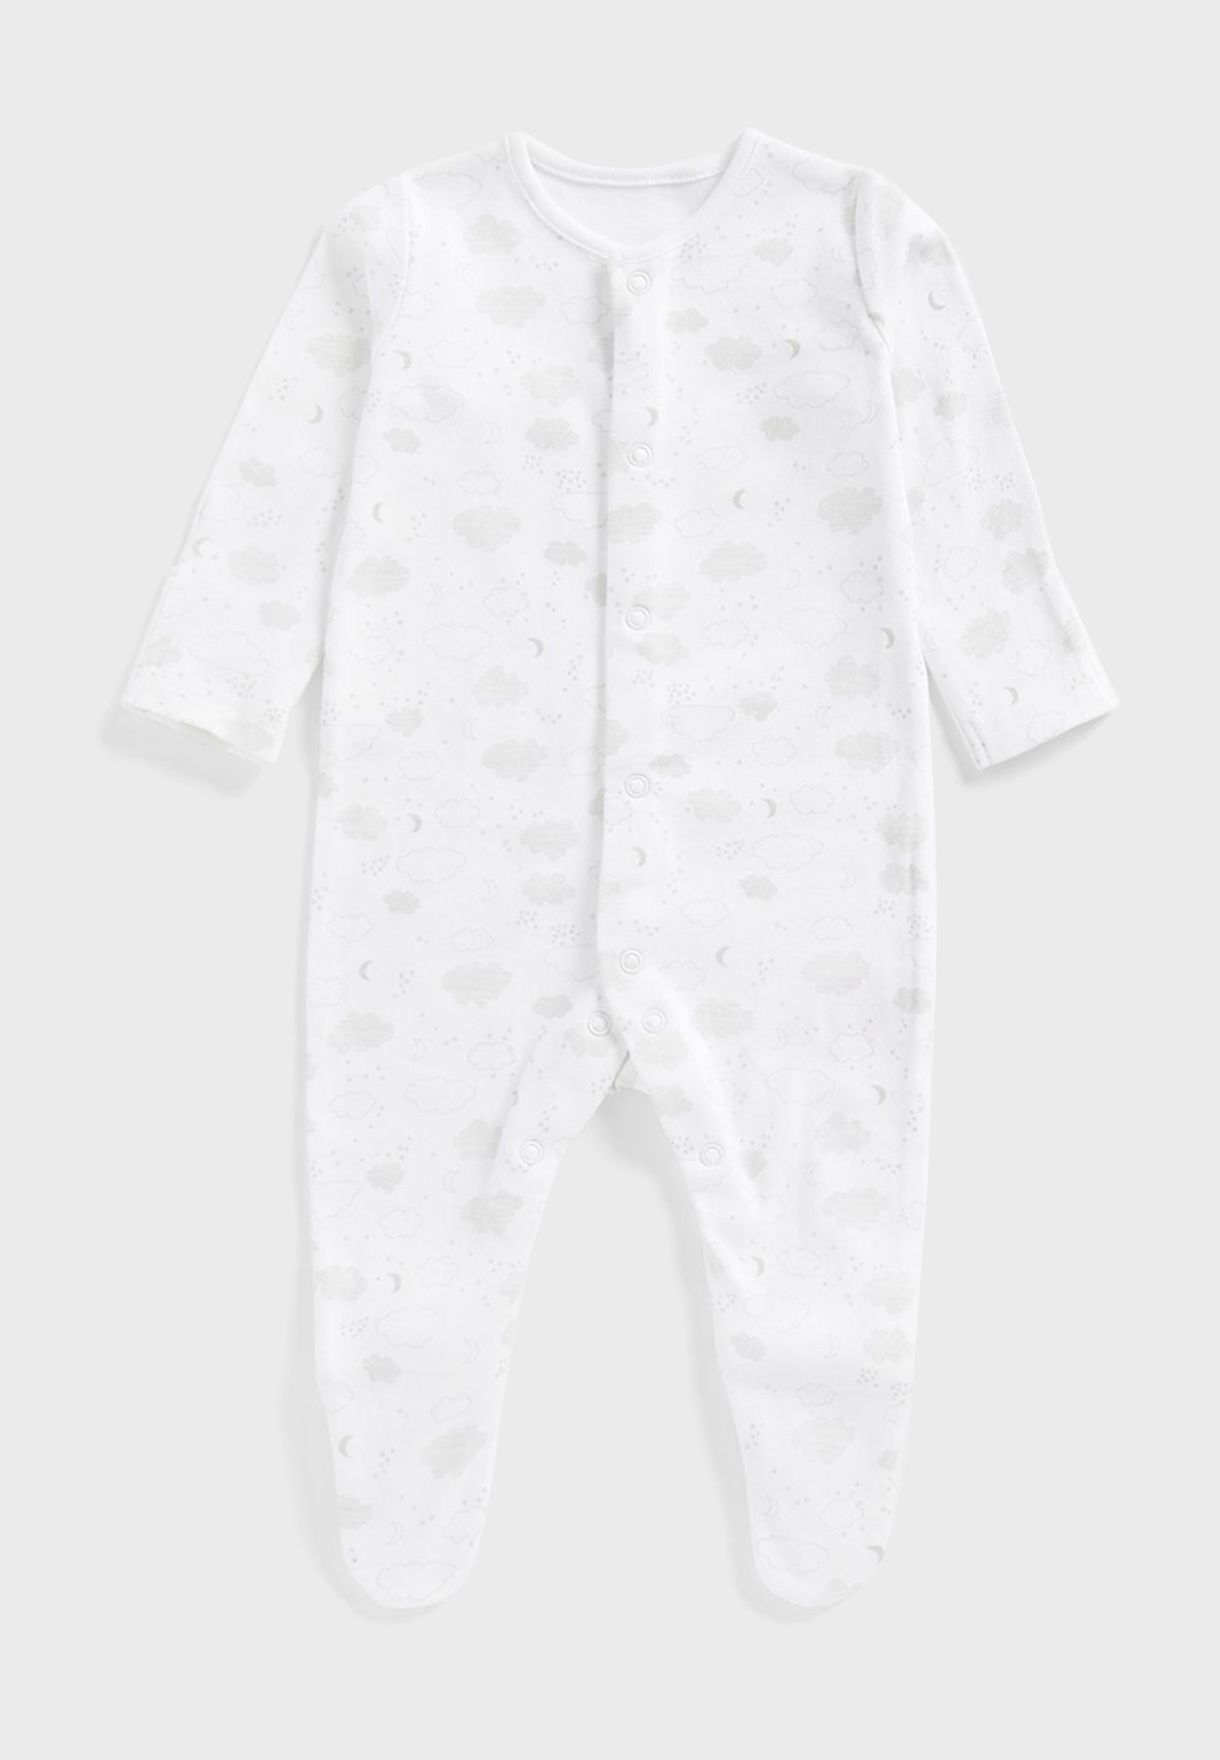 Infant 3 Pack Assorted Onesies